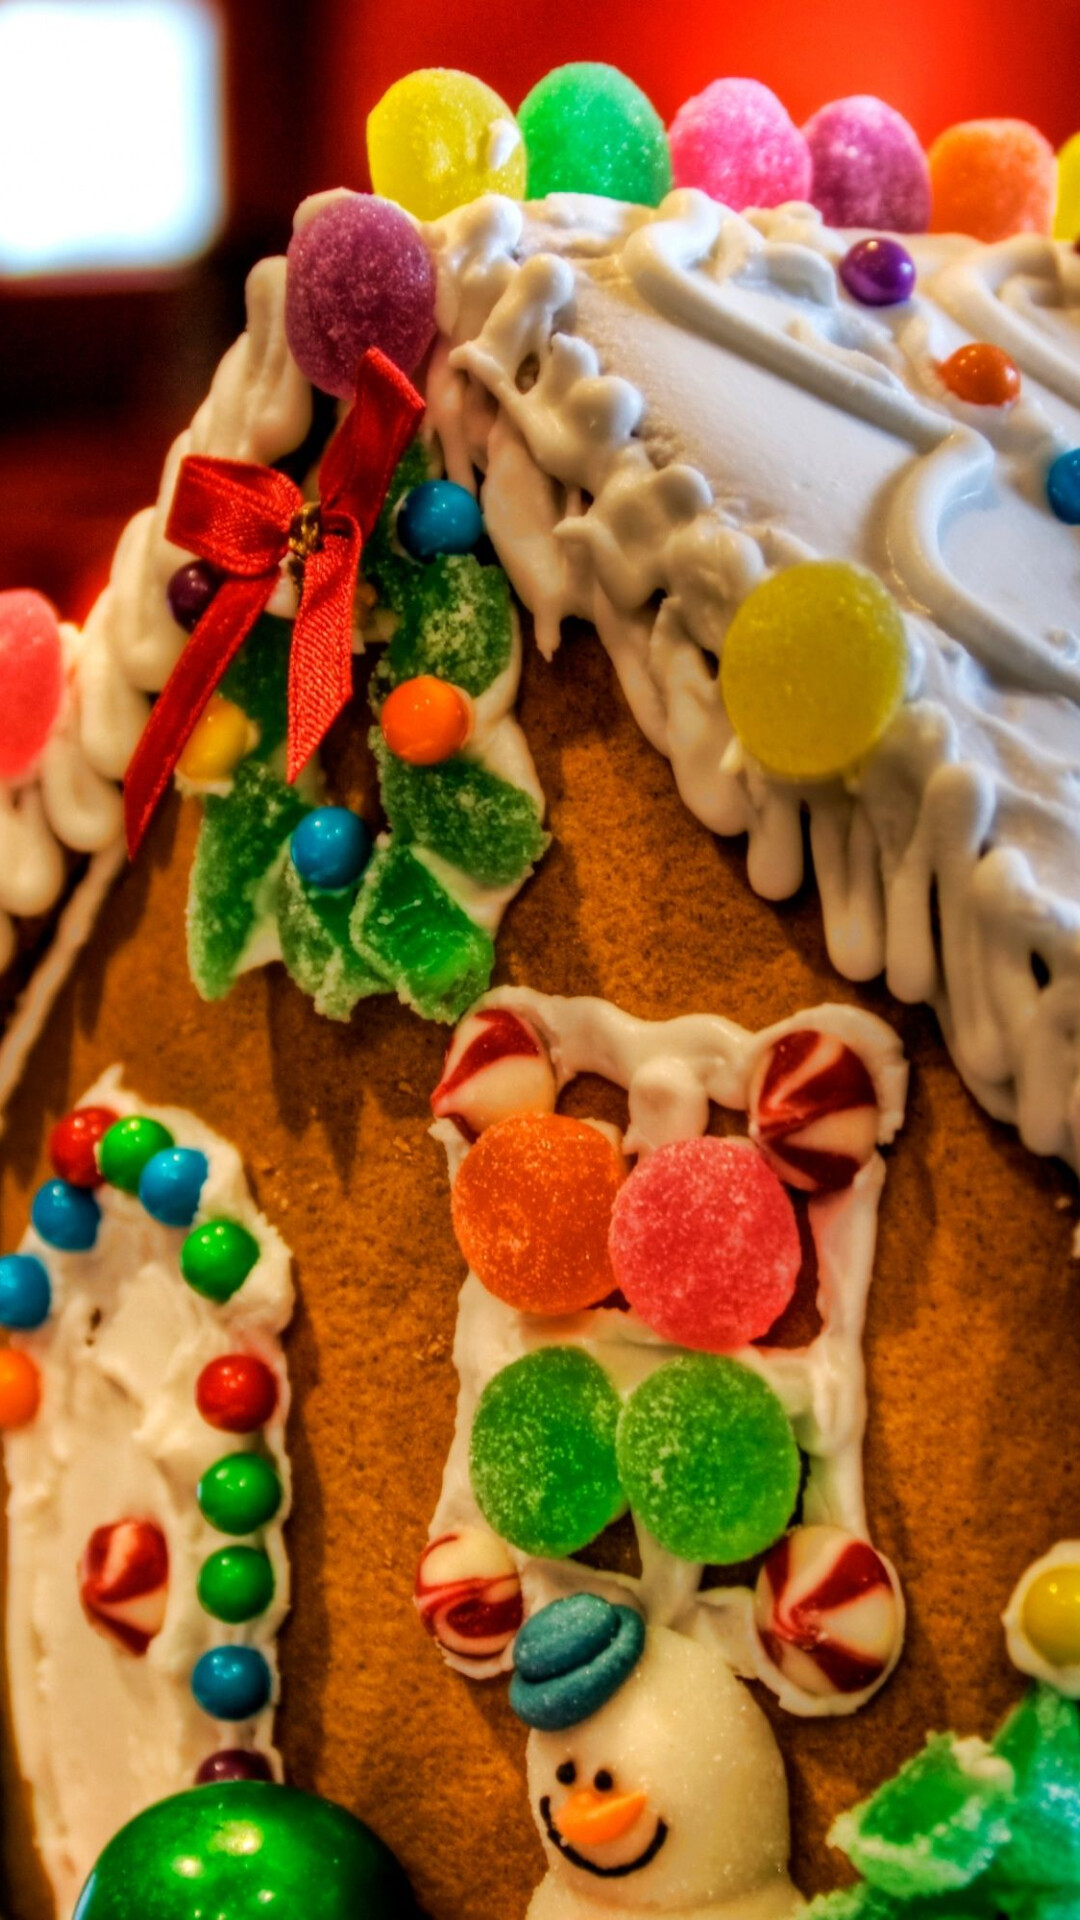 Gingerbread House: Cookie construction, Jelly beans, gumdrops, M&Ms, Hand-decorated sugar cookies. 1080x1920 Full HD Background.